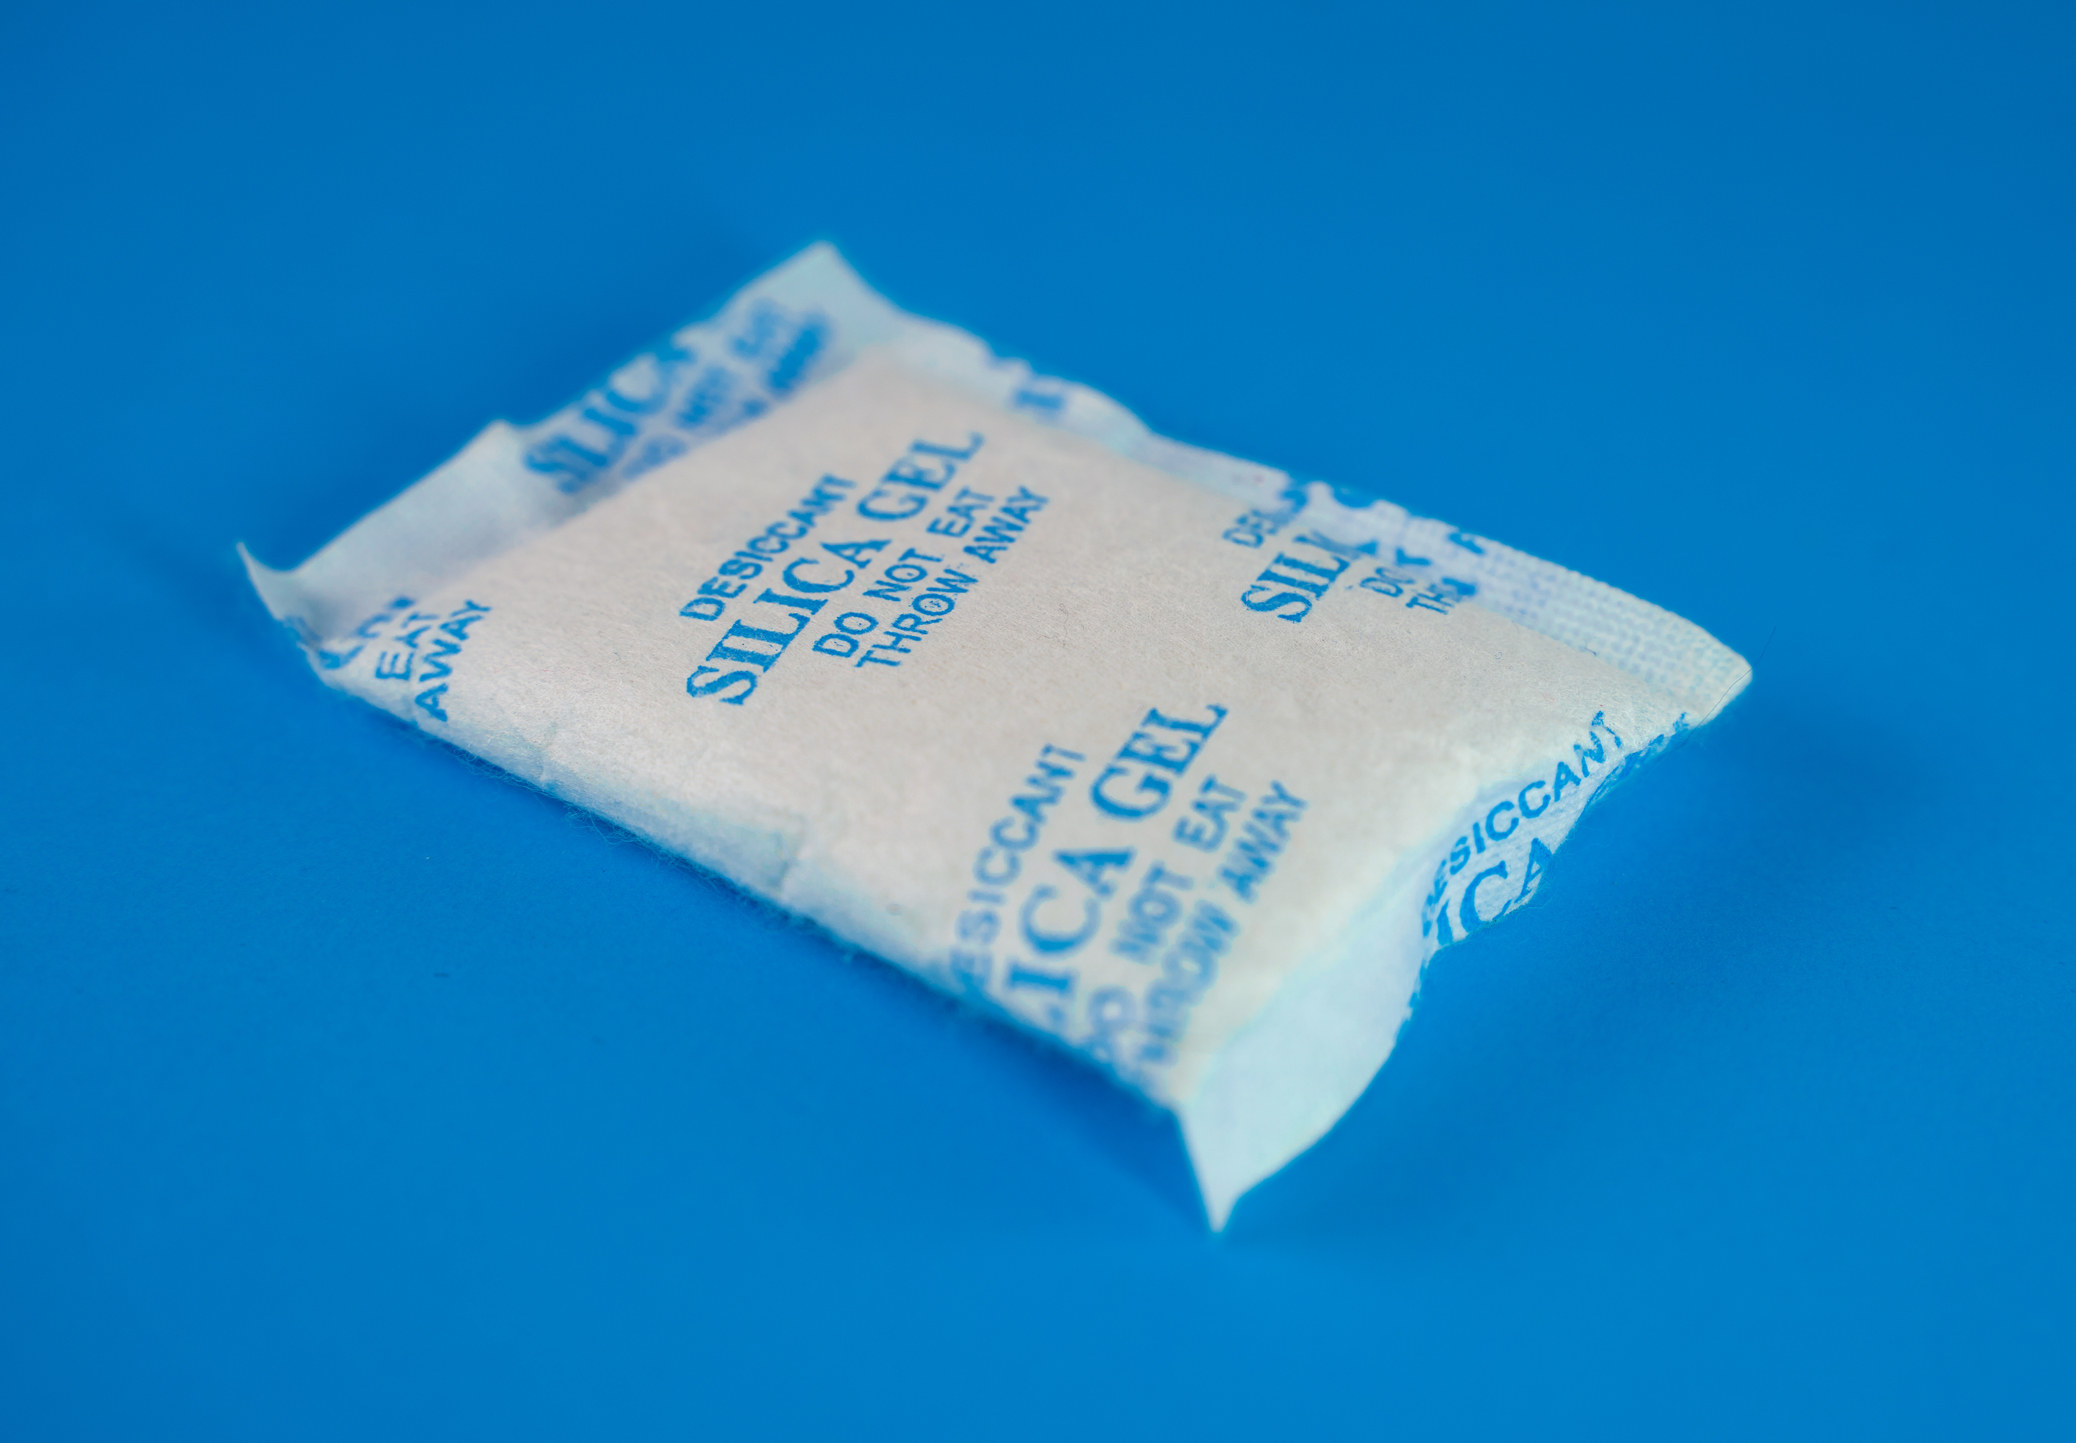 A silica gel packet on a blue table